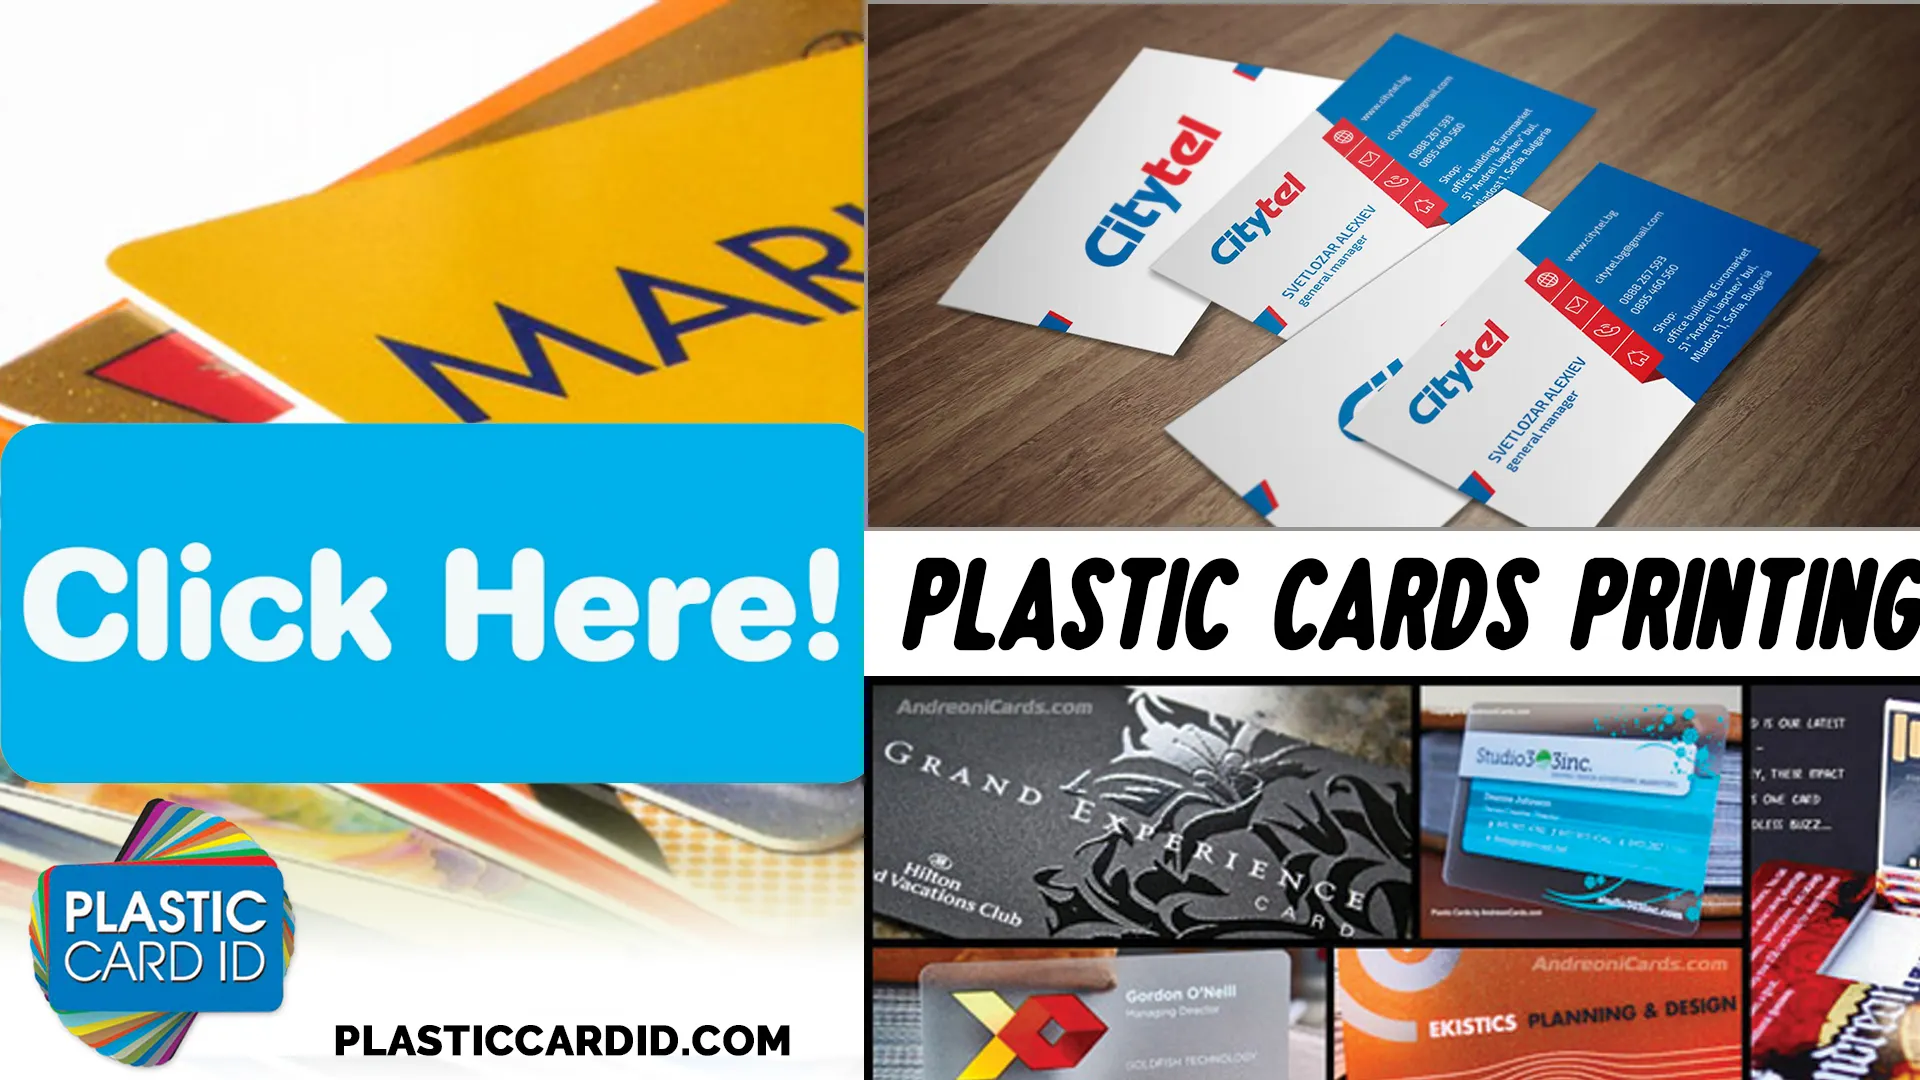 Welcome to the Future of Sustainable Card Manufacturing 